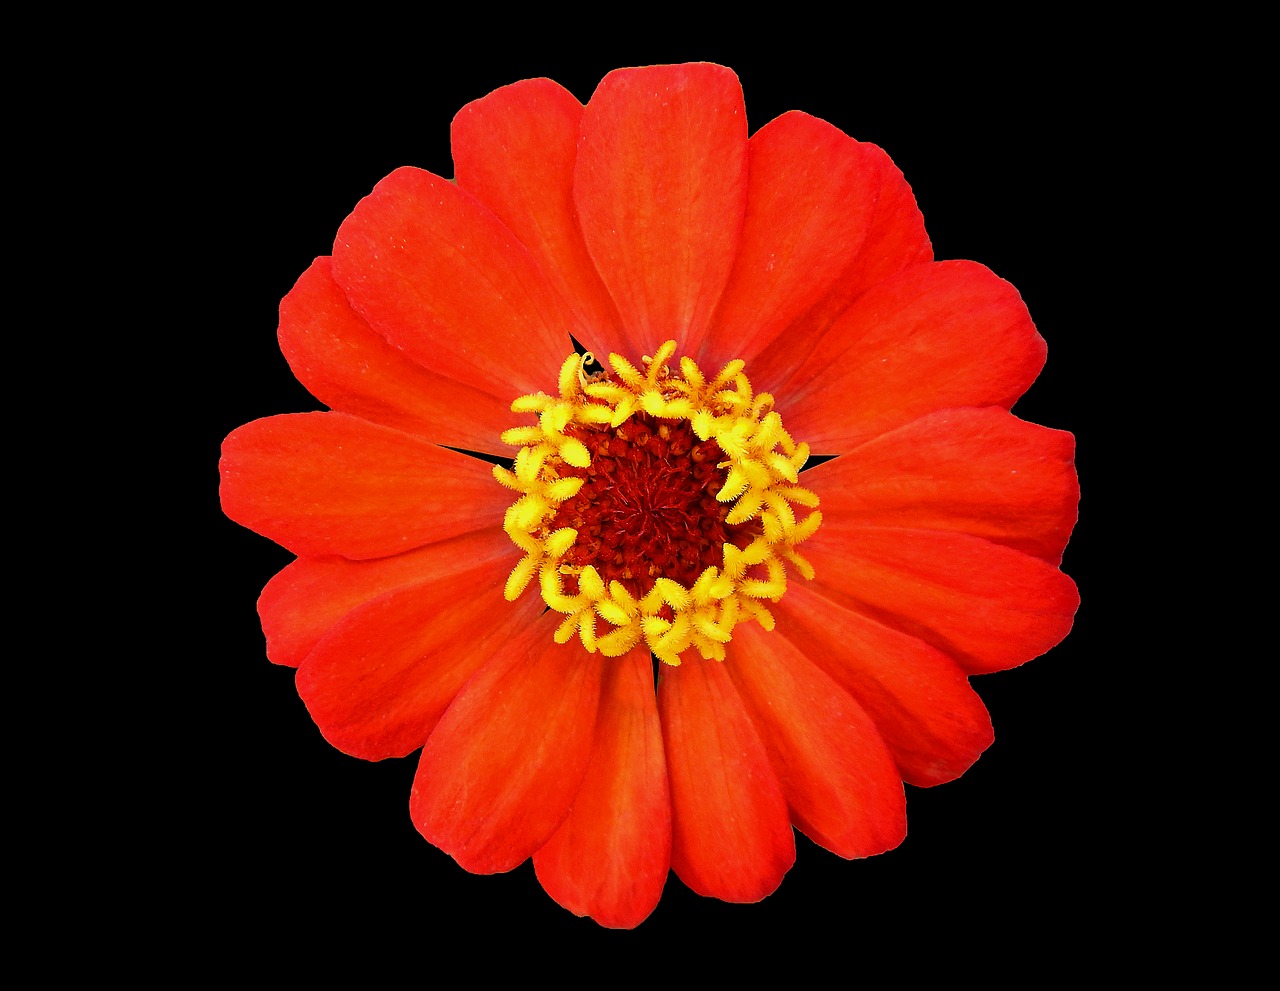 red and yellow flower garden black background free photo